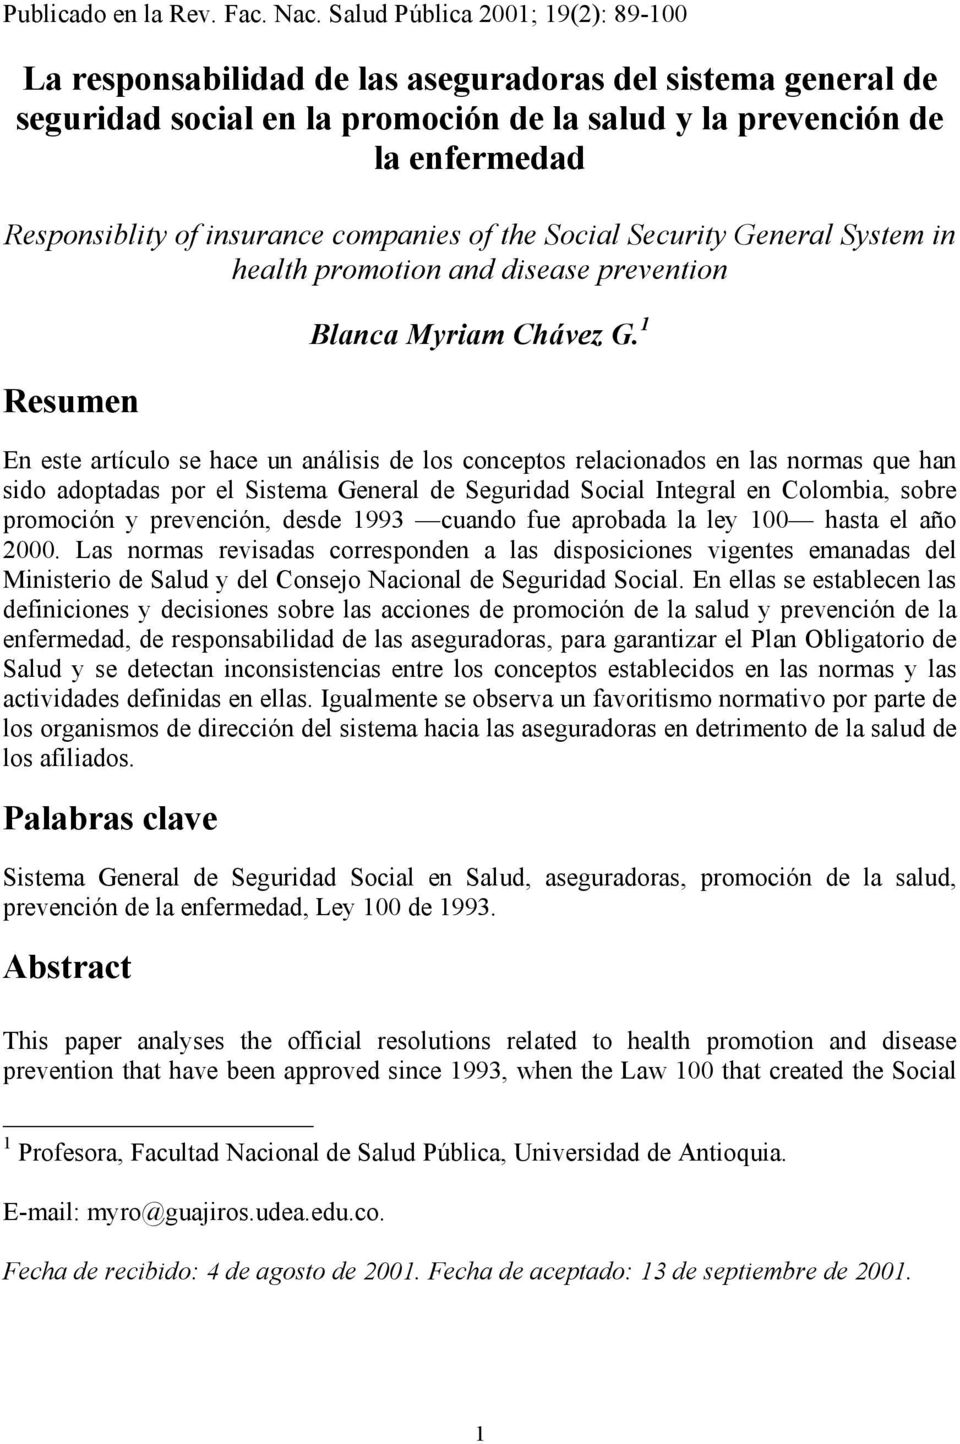 insurance companies of the Social Security General System in health promotion and disease prevention Resumen Blanca Myriam Chávez G.